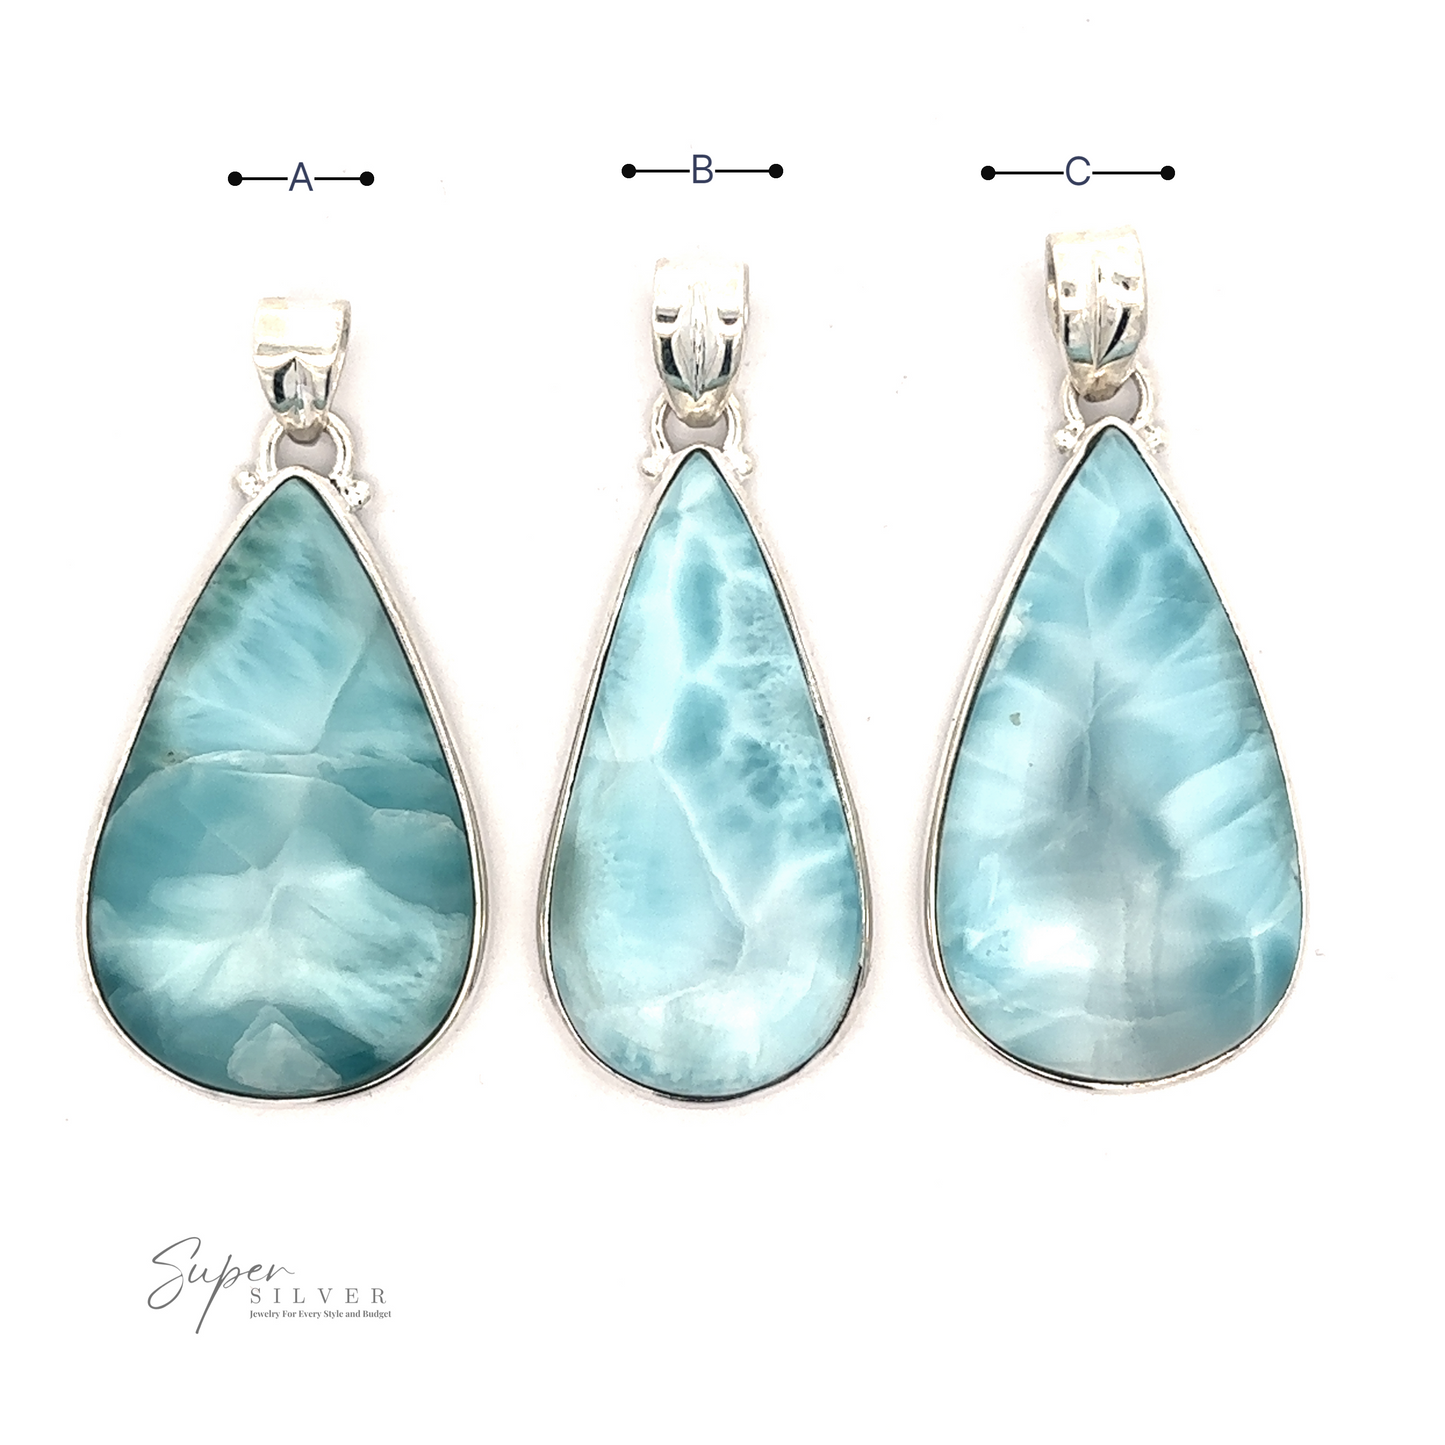 
                  
                    Three Larger Teardrop Larimar Pendants with blue, teardrop-shaped stones labeled A, B, and C are displayed in a row on a white background. The logo reading "Super Silver" is in the bottom-left corner.
                  
                